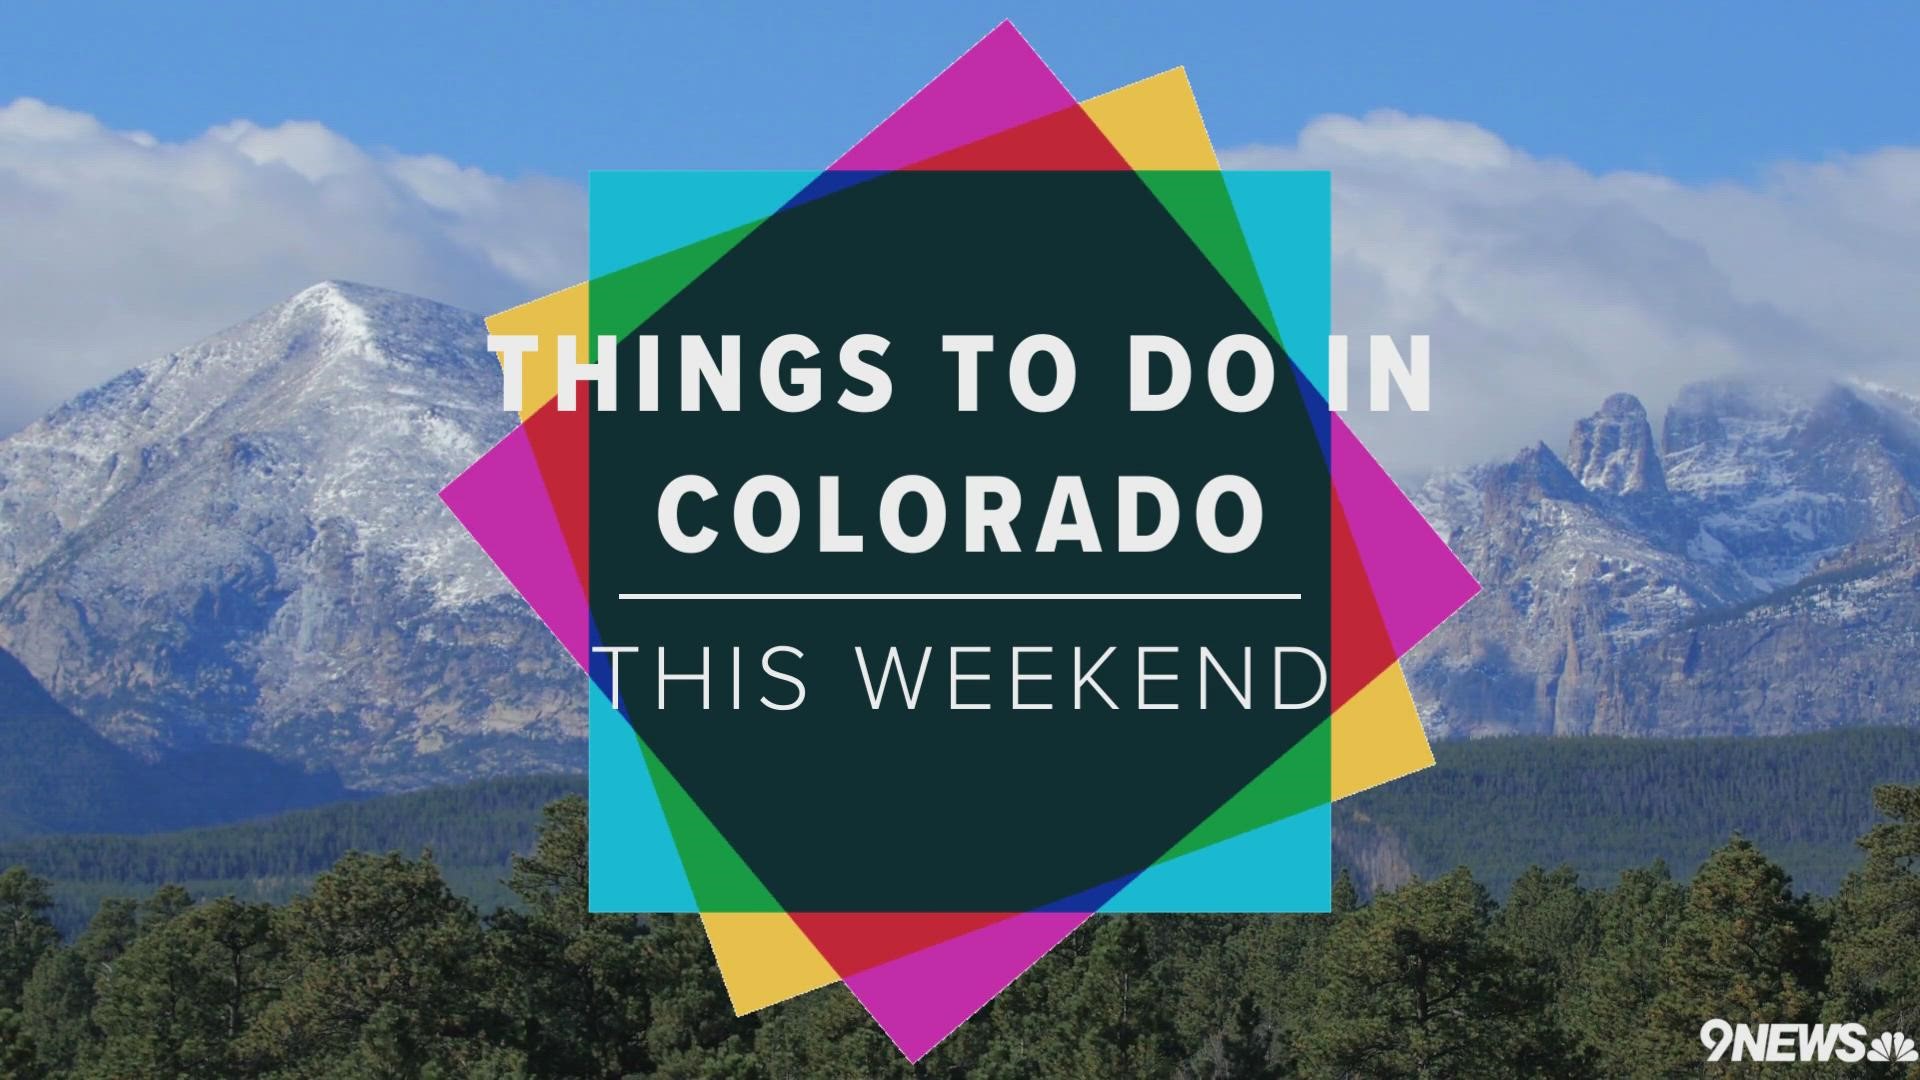 Here are 9 things to do in Colorado this Labor Day weekend 2022.